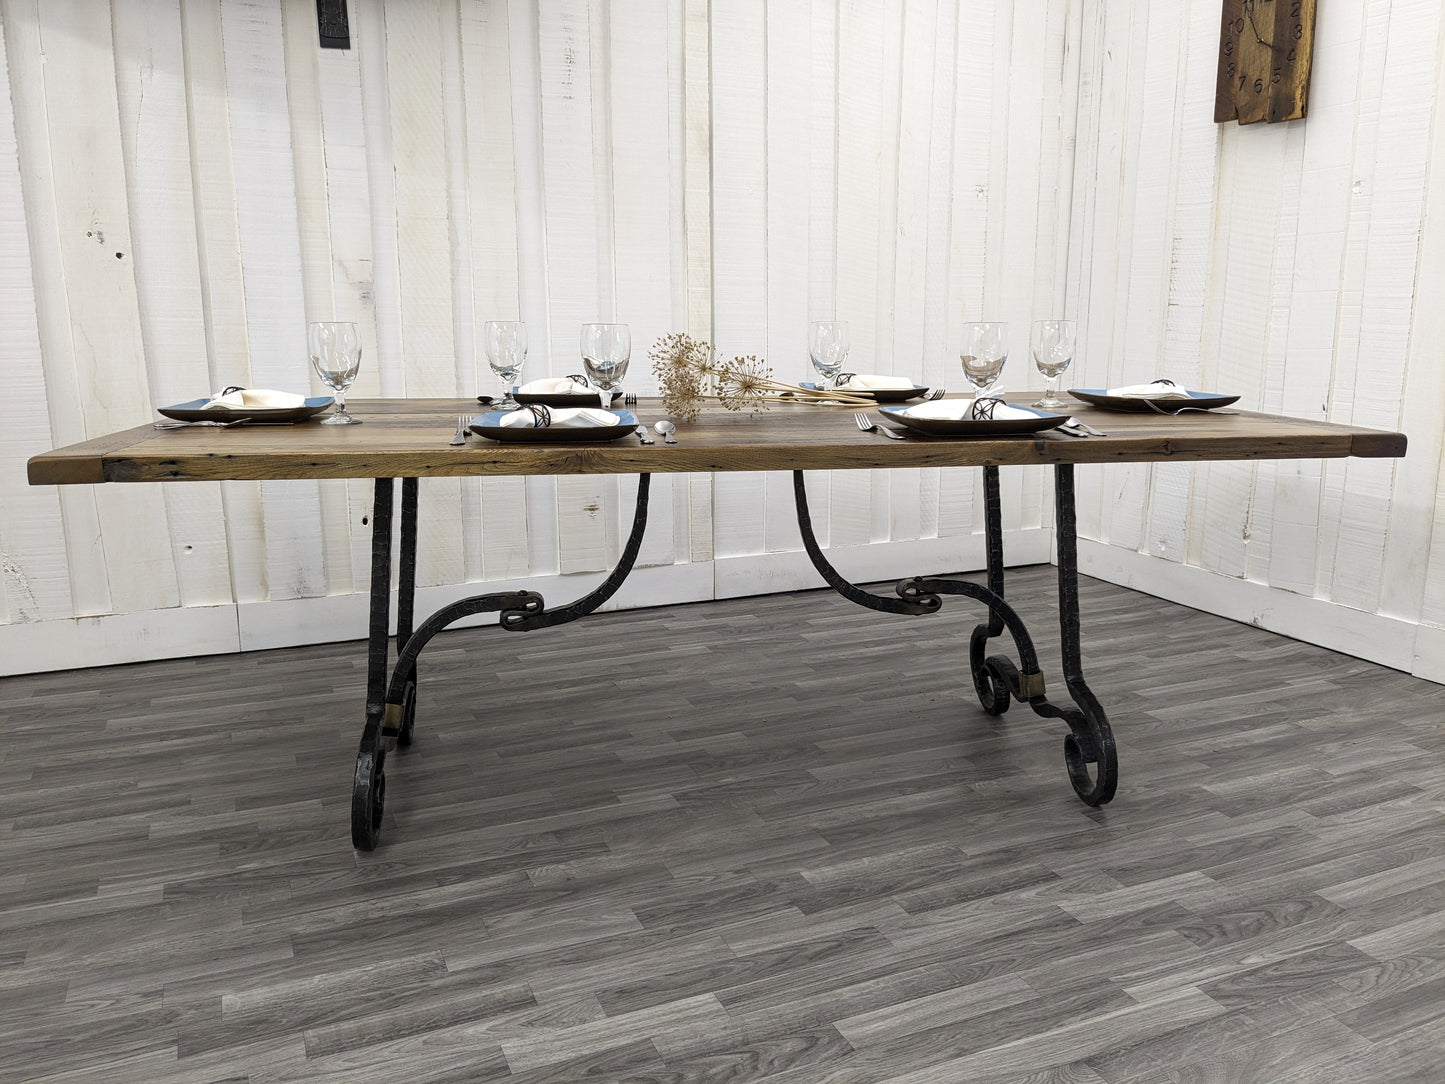 42" x 84" Reclaimed Barnwood Dining Table Top